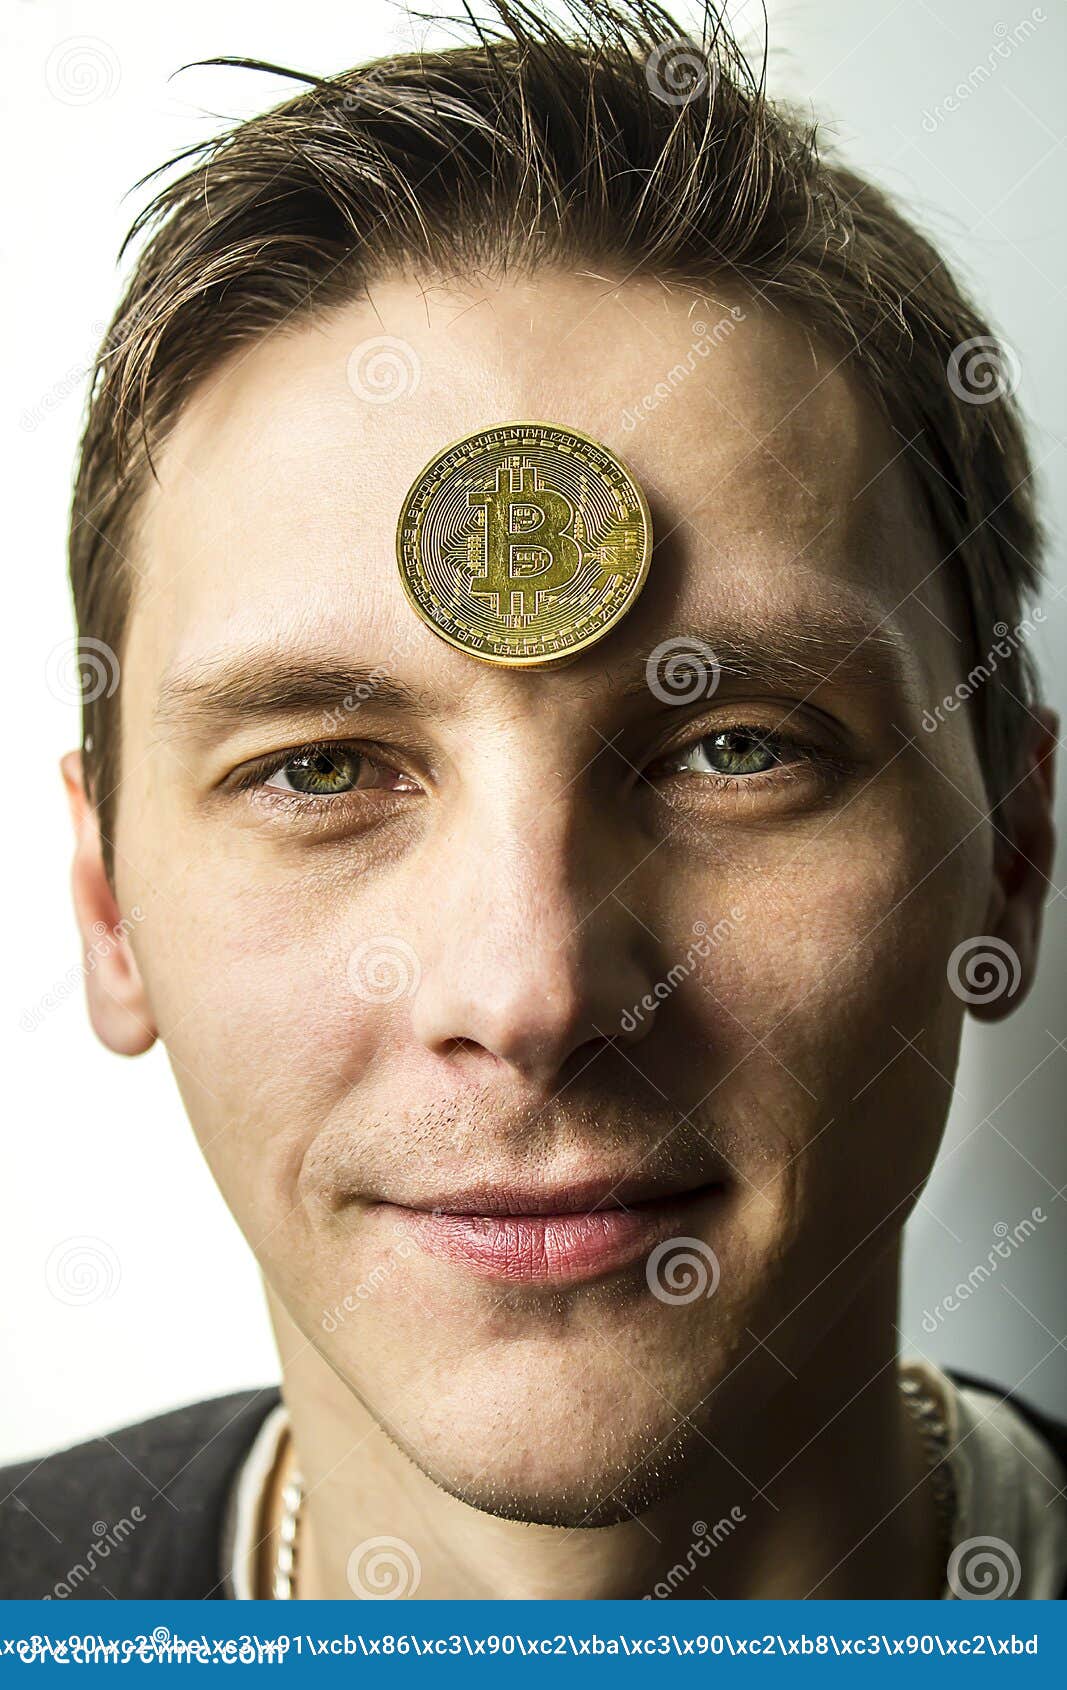 The Guy Meditates With Bitcoin Stock Photo - Image of network, earnings